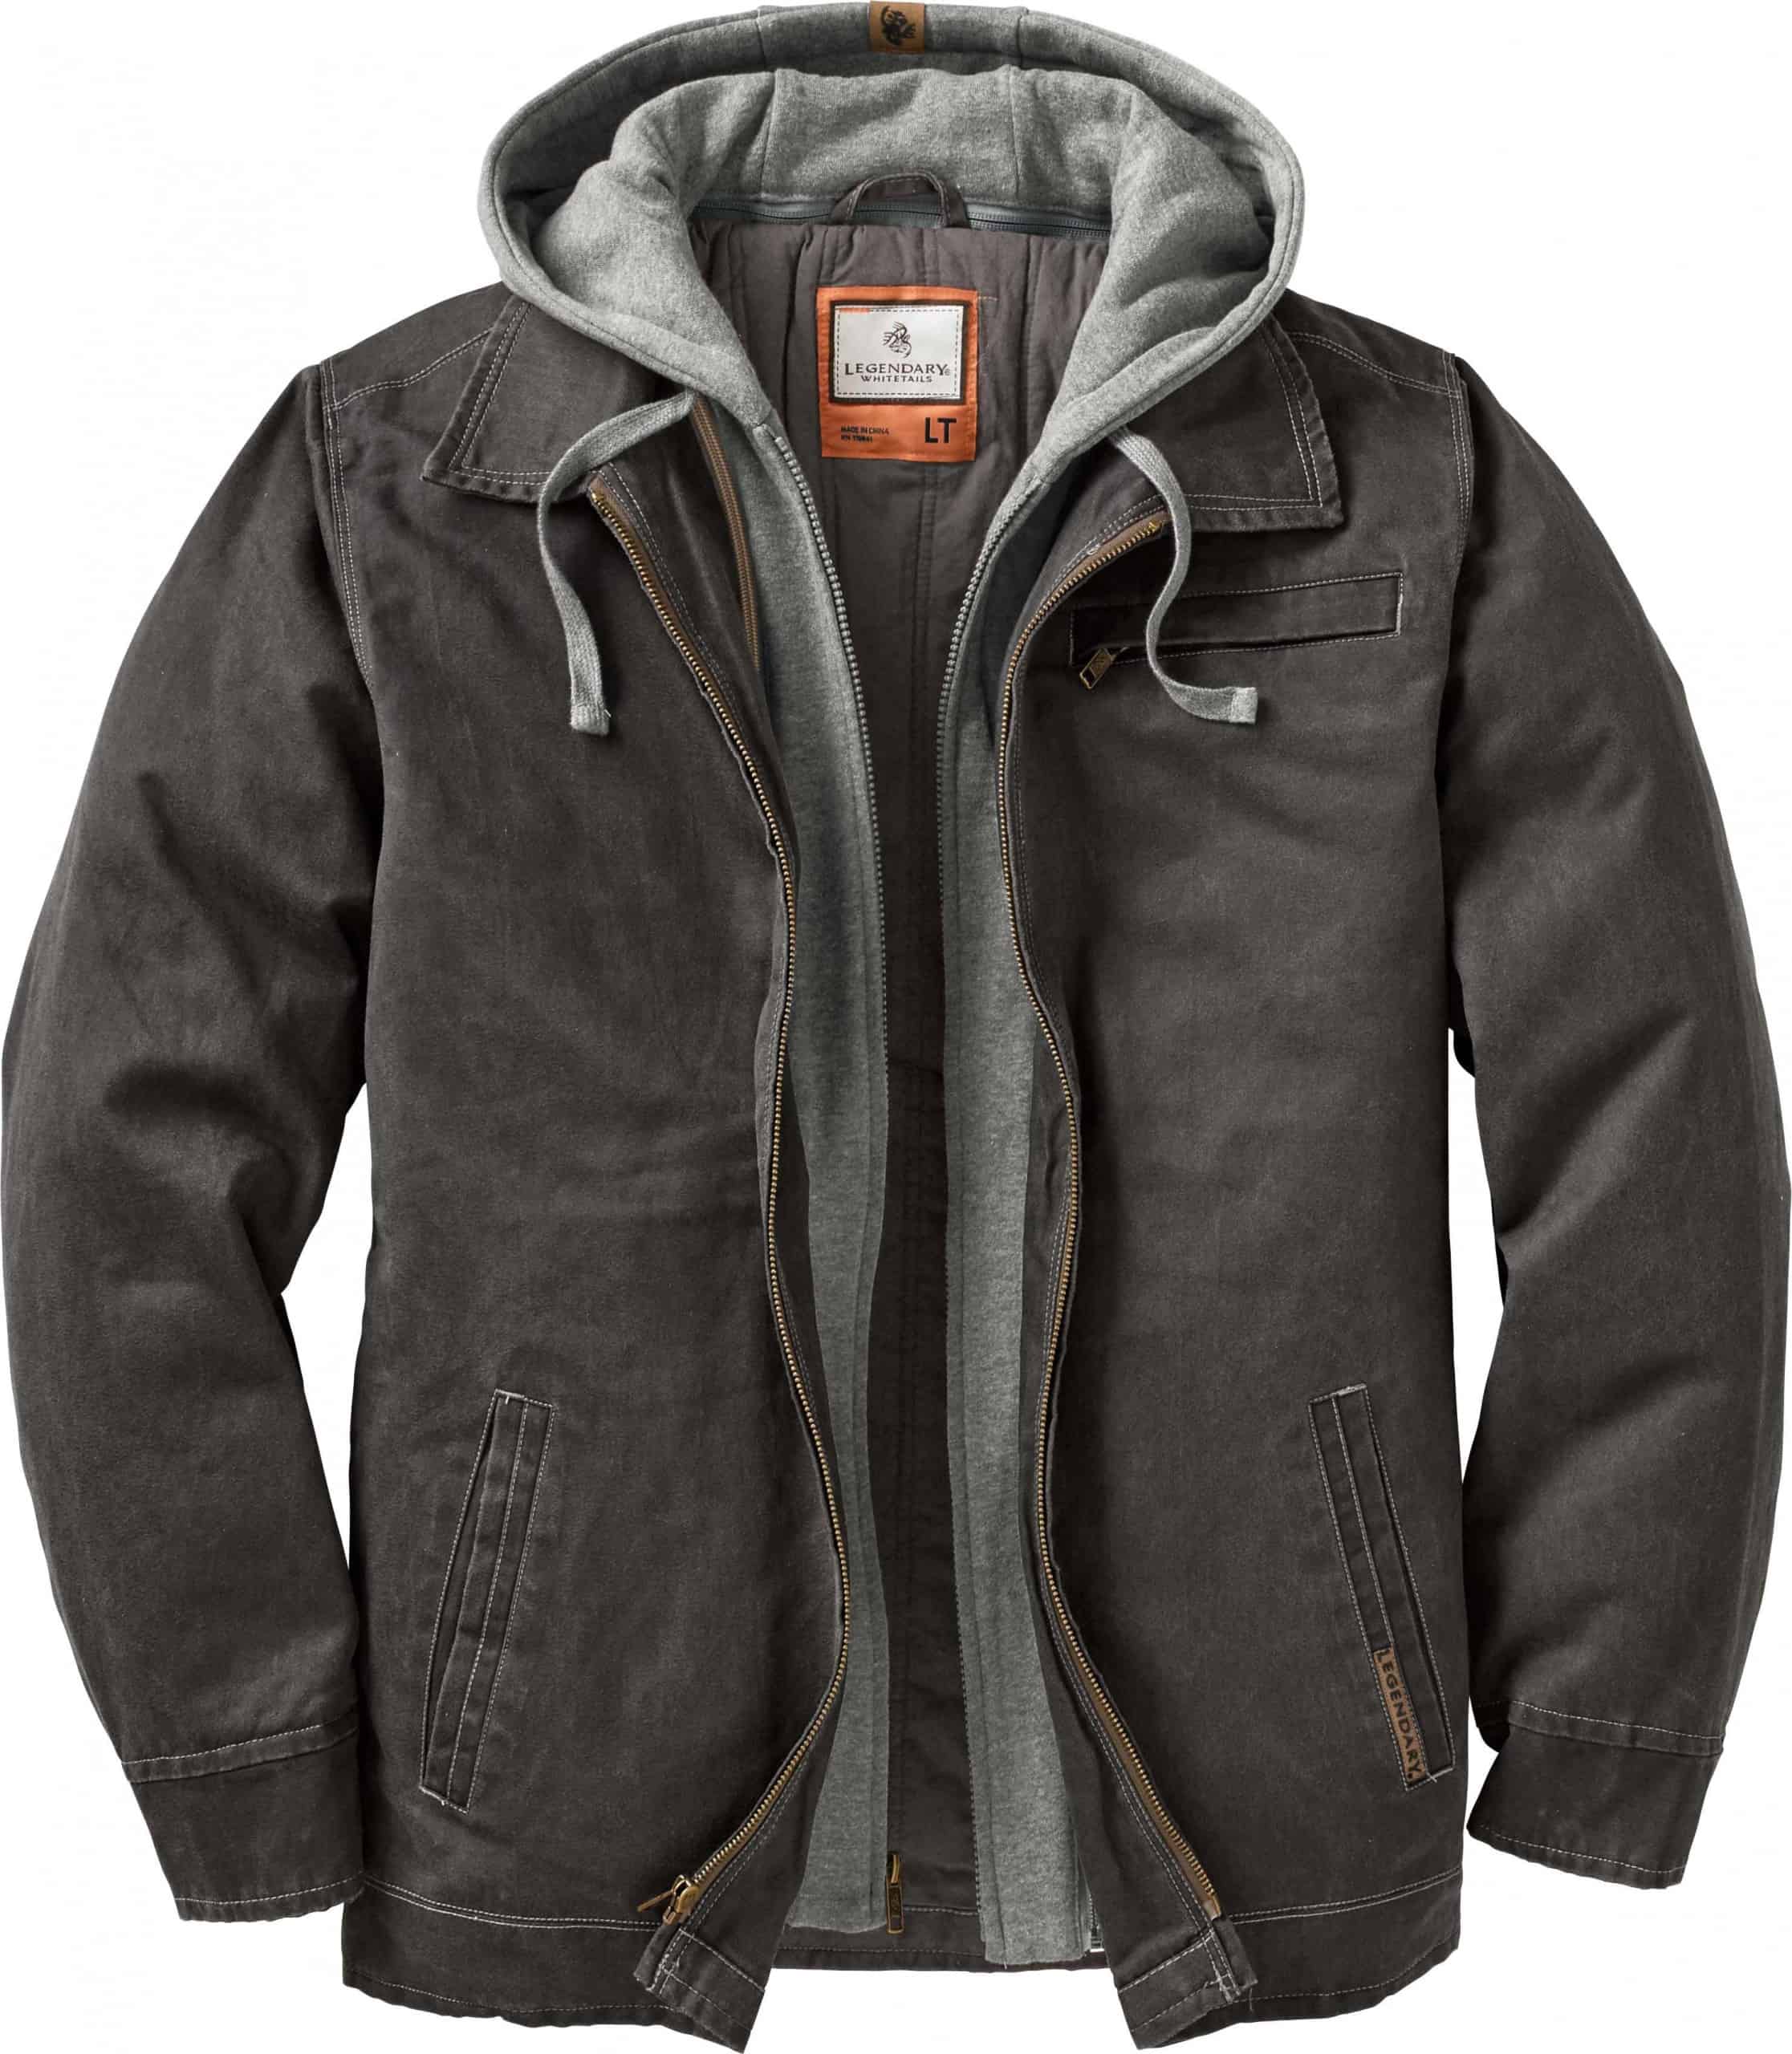 5 Best Men's Canvas Utility Jackets for Fall & Winter - We Who Roam